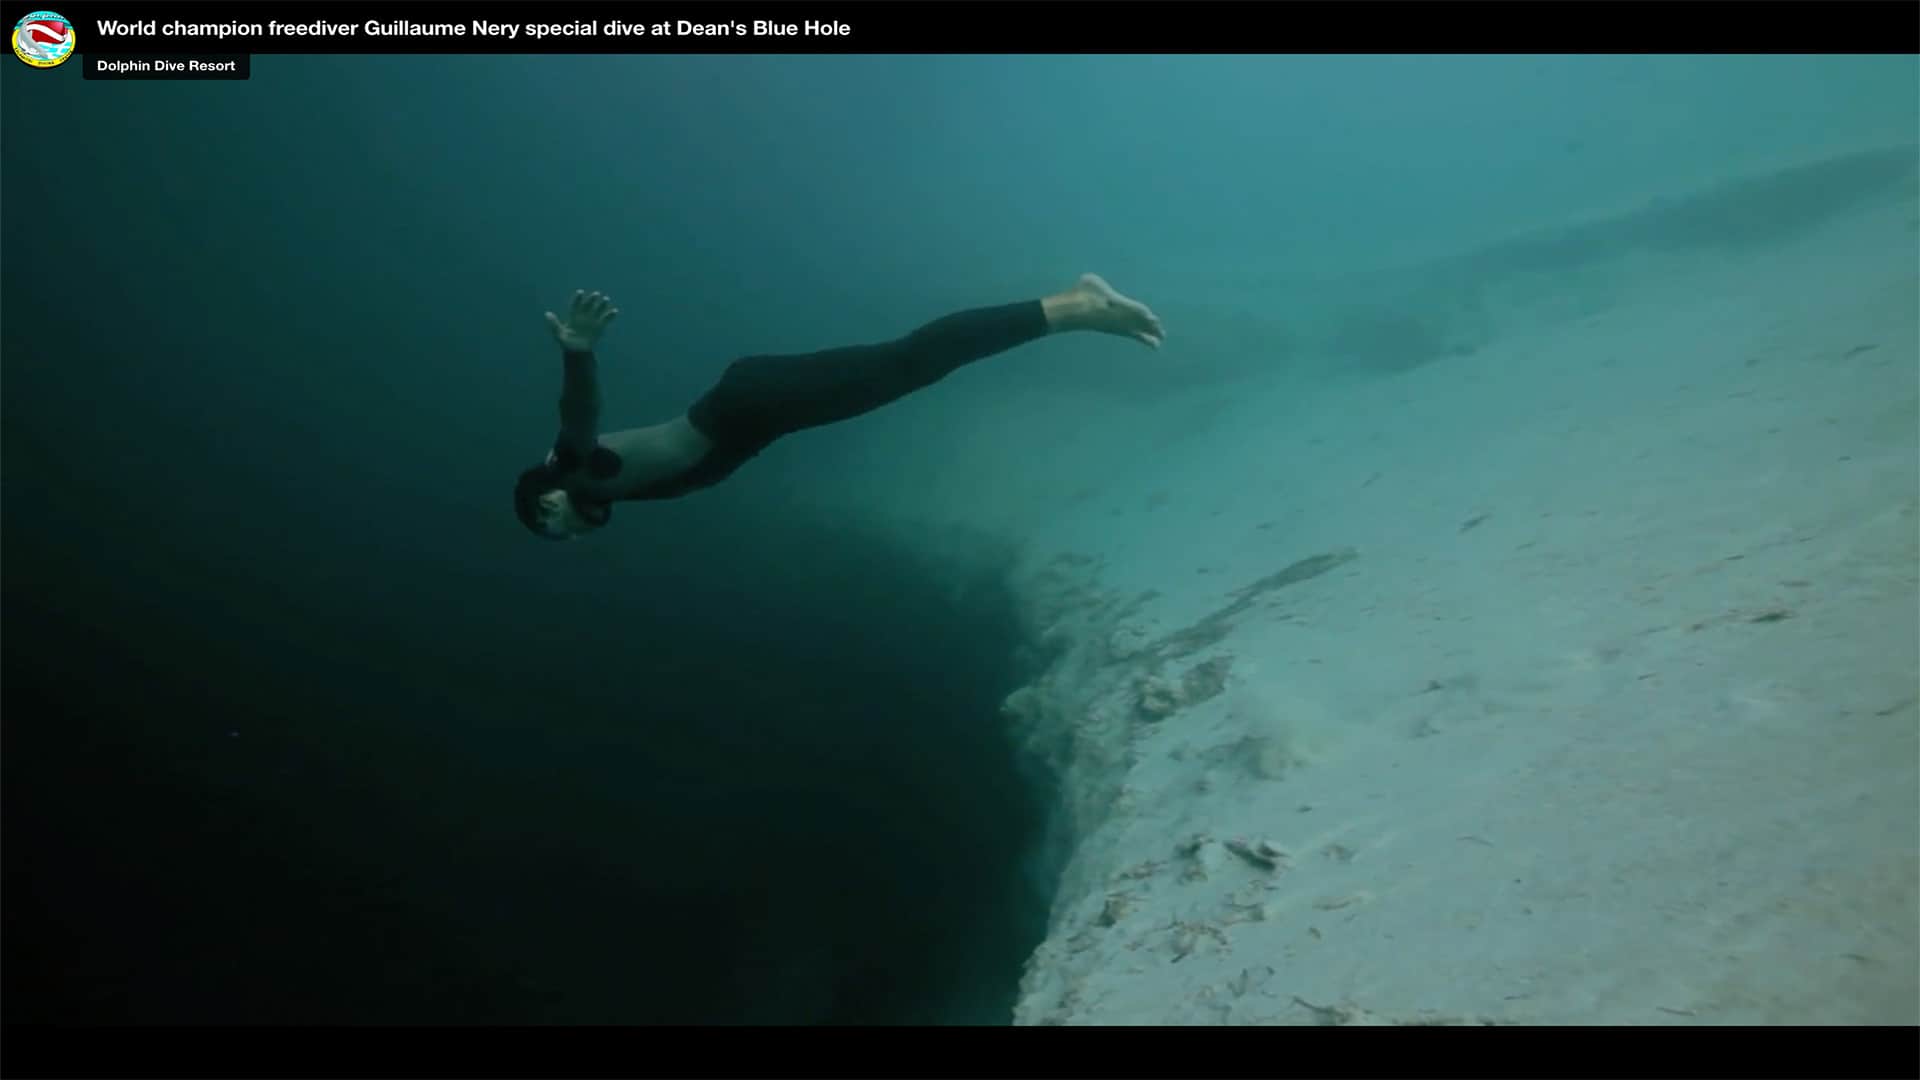 Screenshot: Guillaume Nery special dive at Dean's Blue Hole